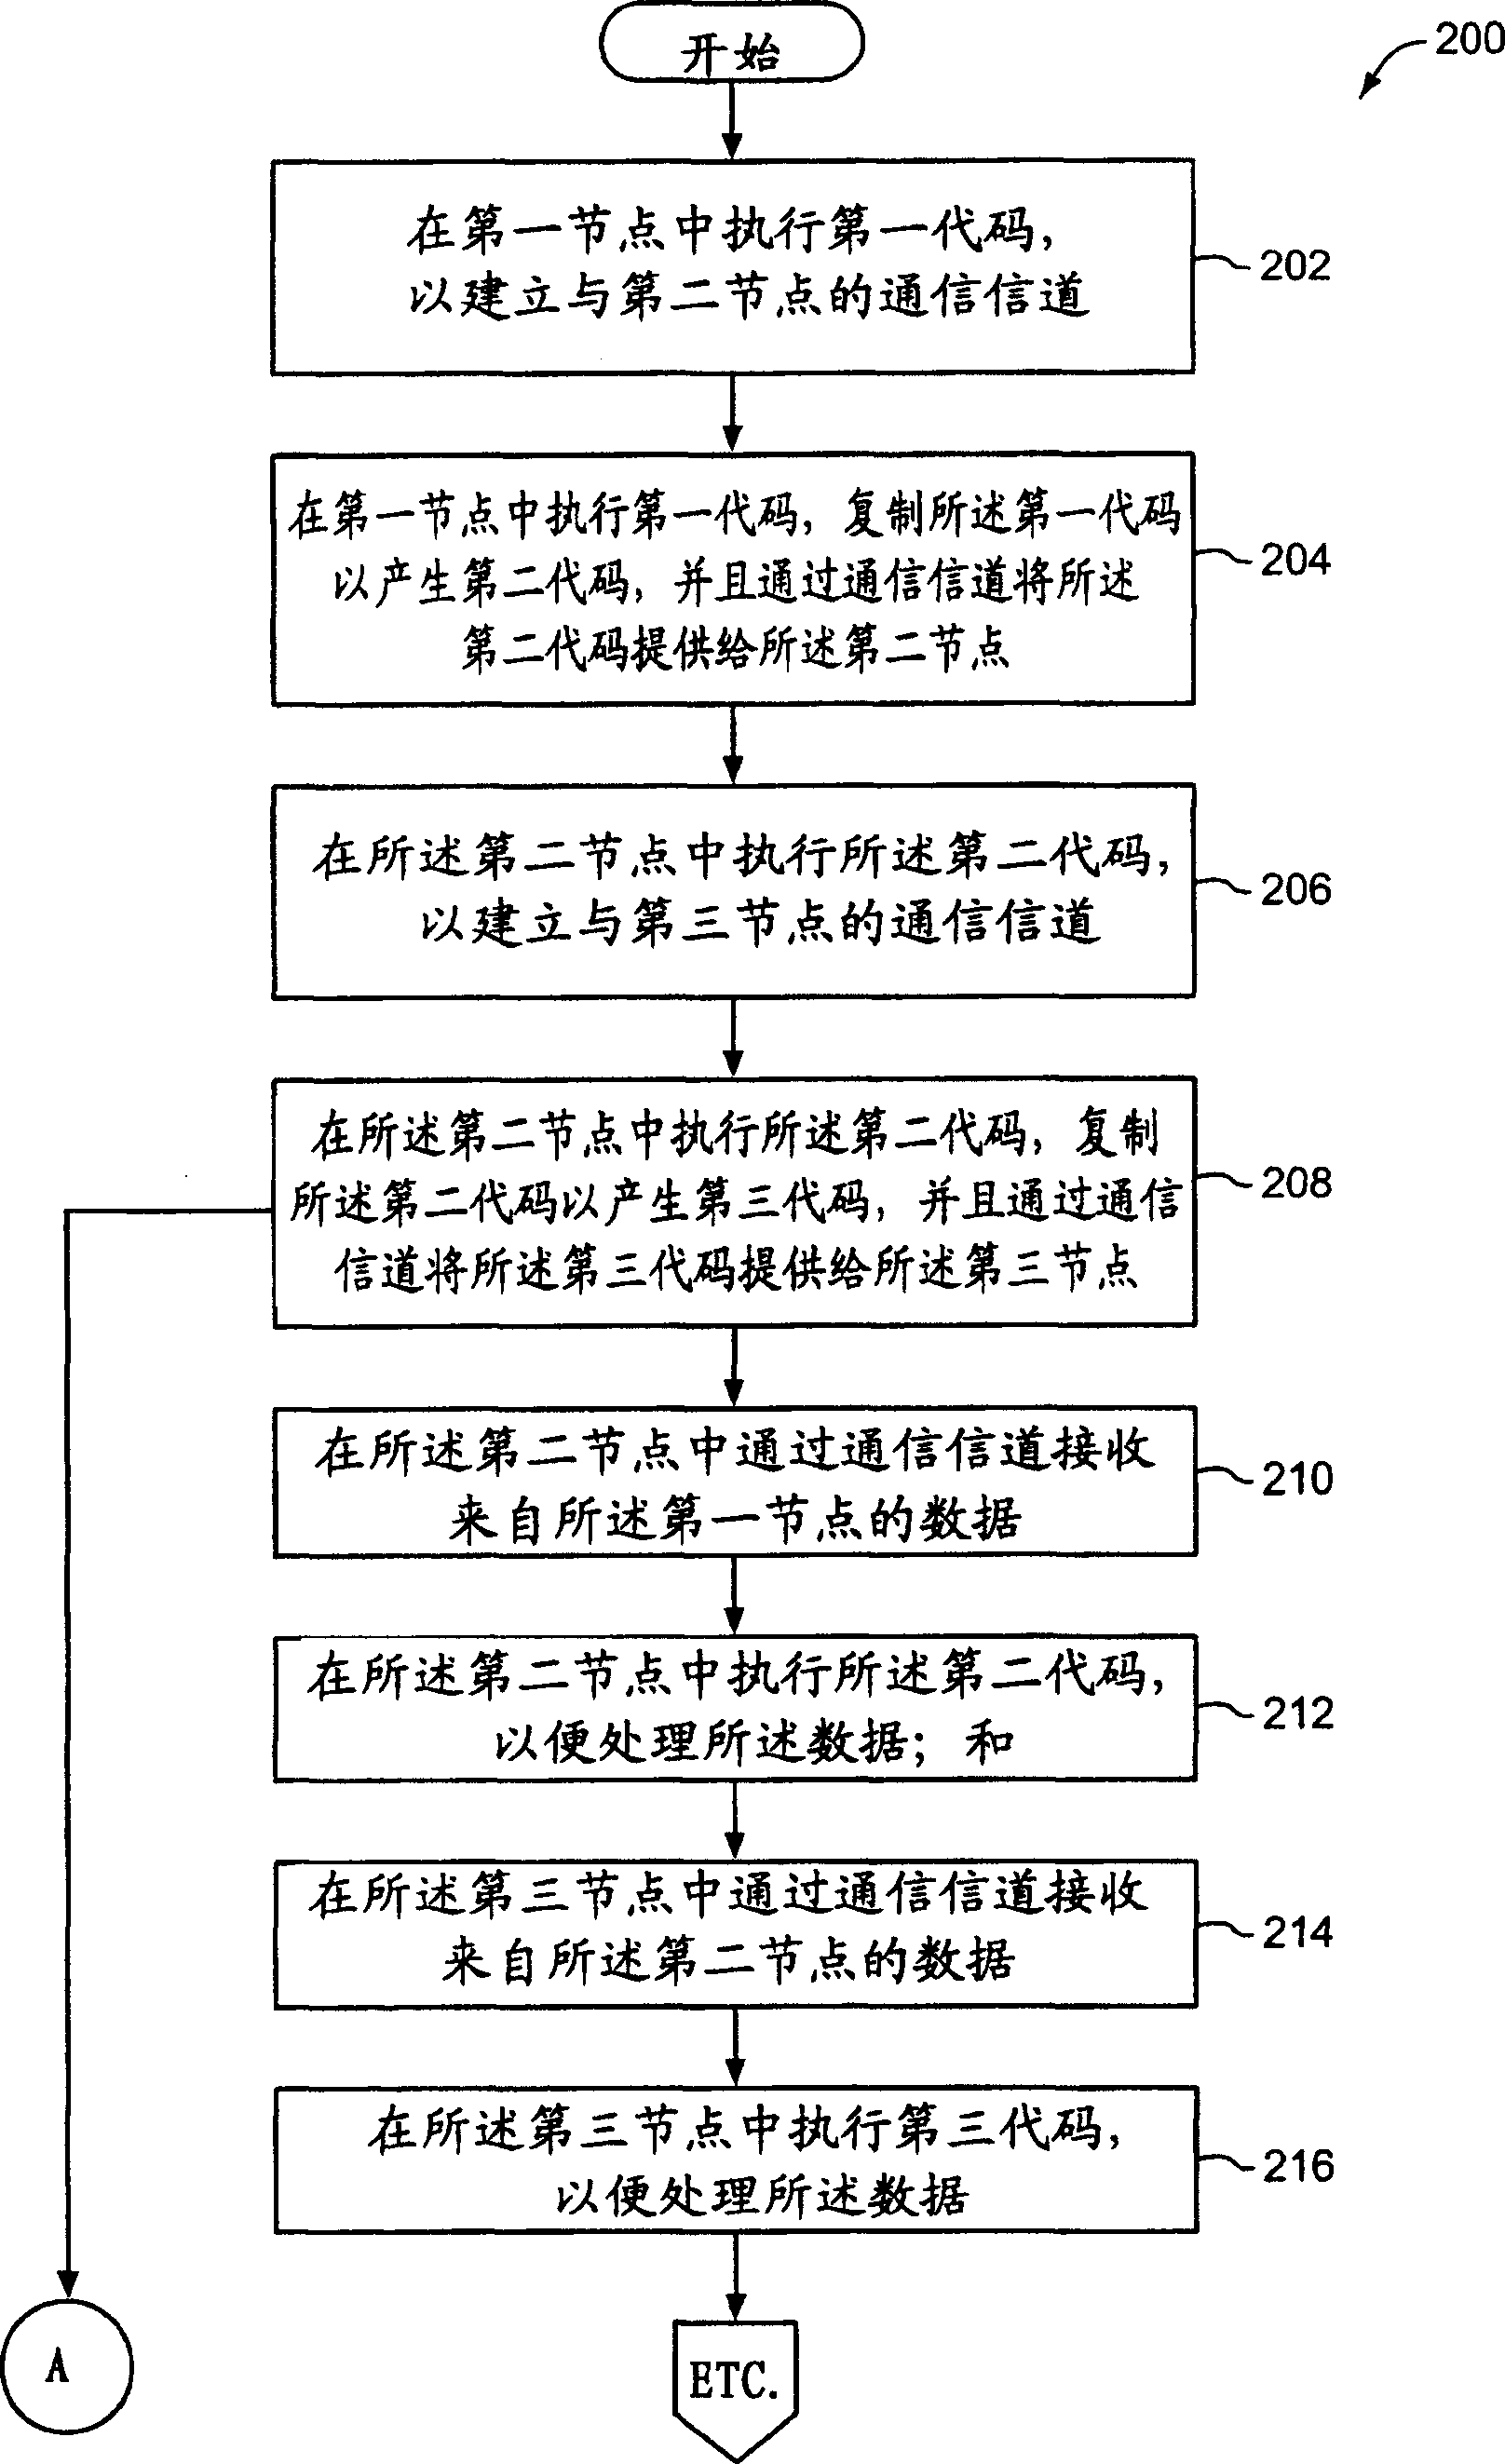 Data transfer to nodes of a communication network using self-replicating code